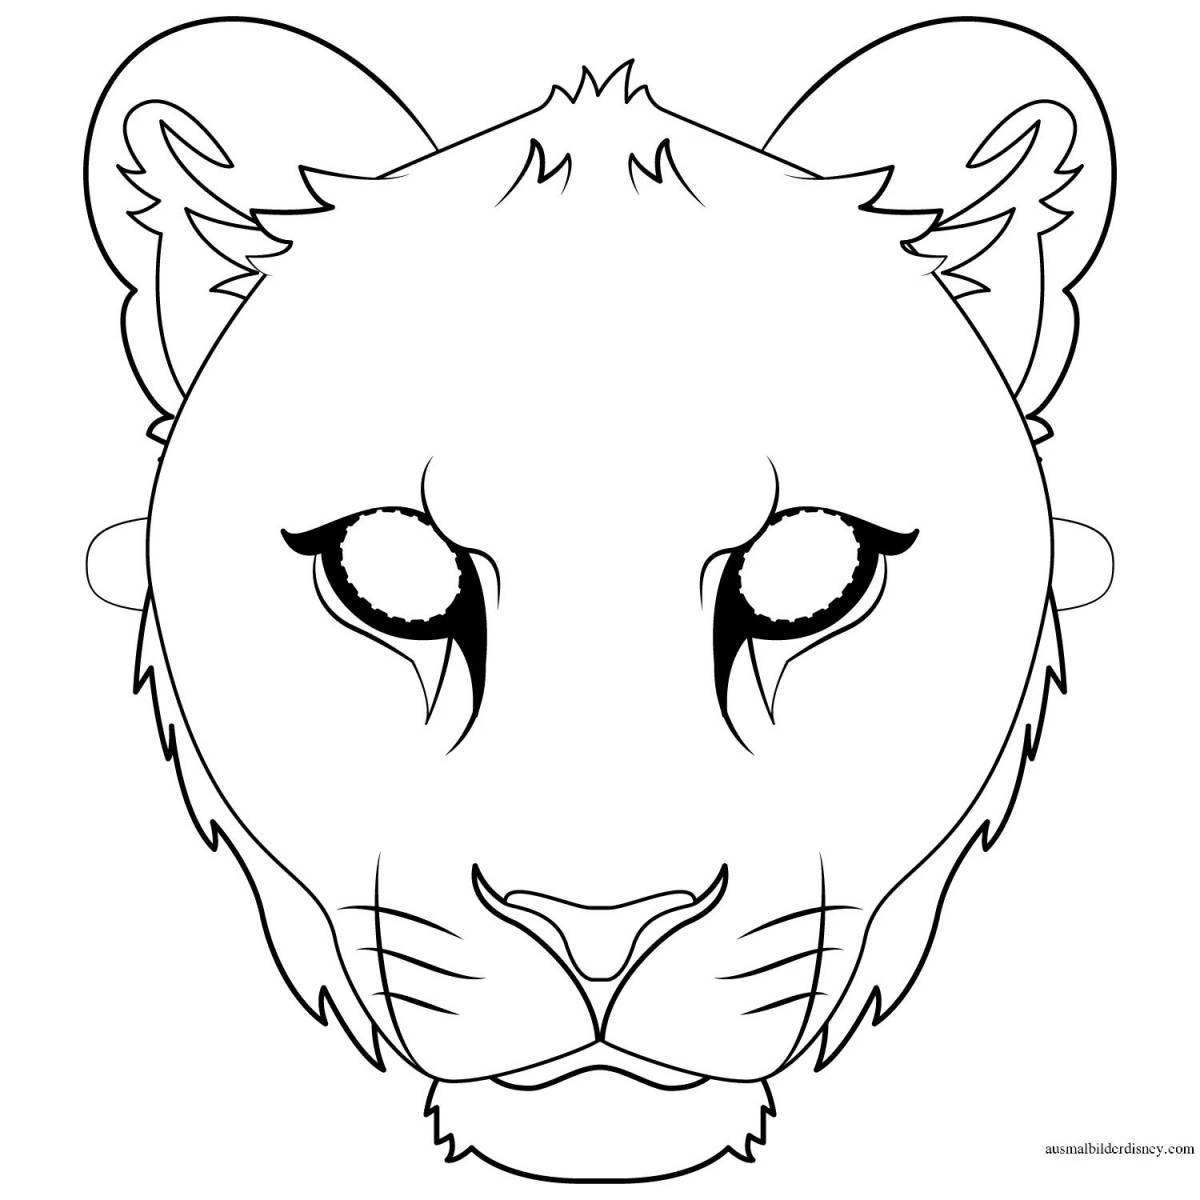 Coloring book luxurious muzzle of a lion